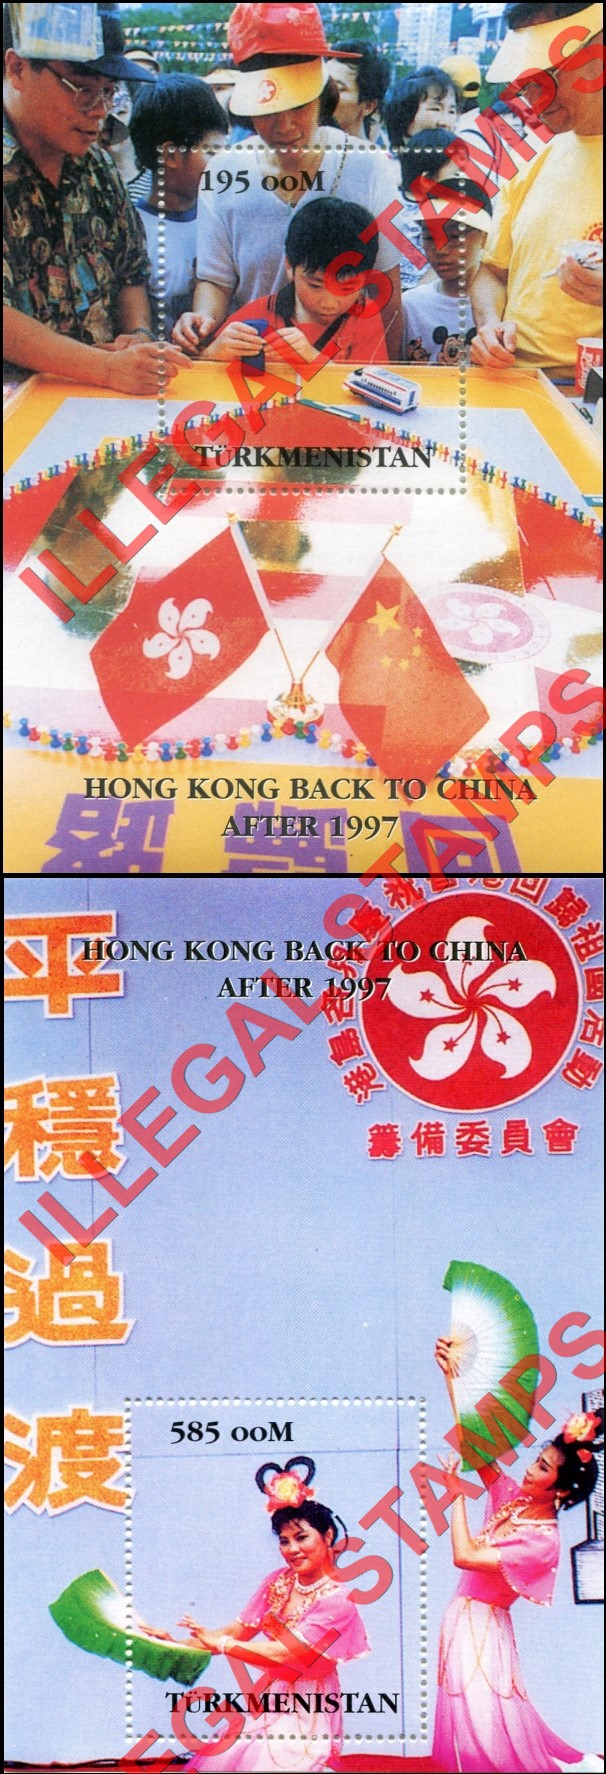 Turkmenistan 1997 Hong Kong Back to China Illegal Stamp Souvenir Sheets of 1